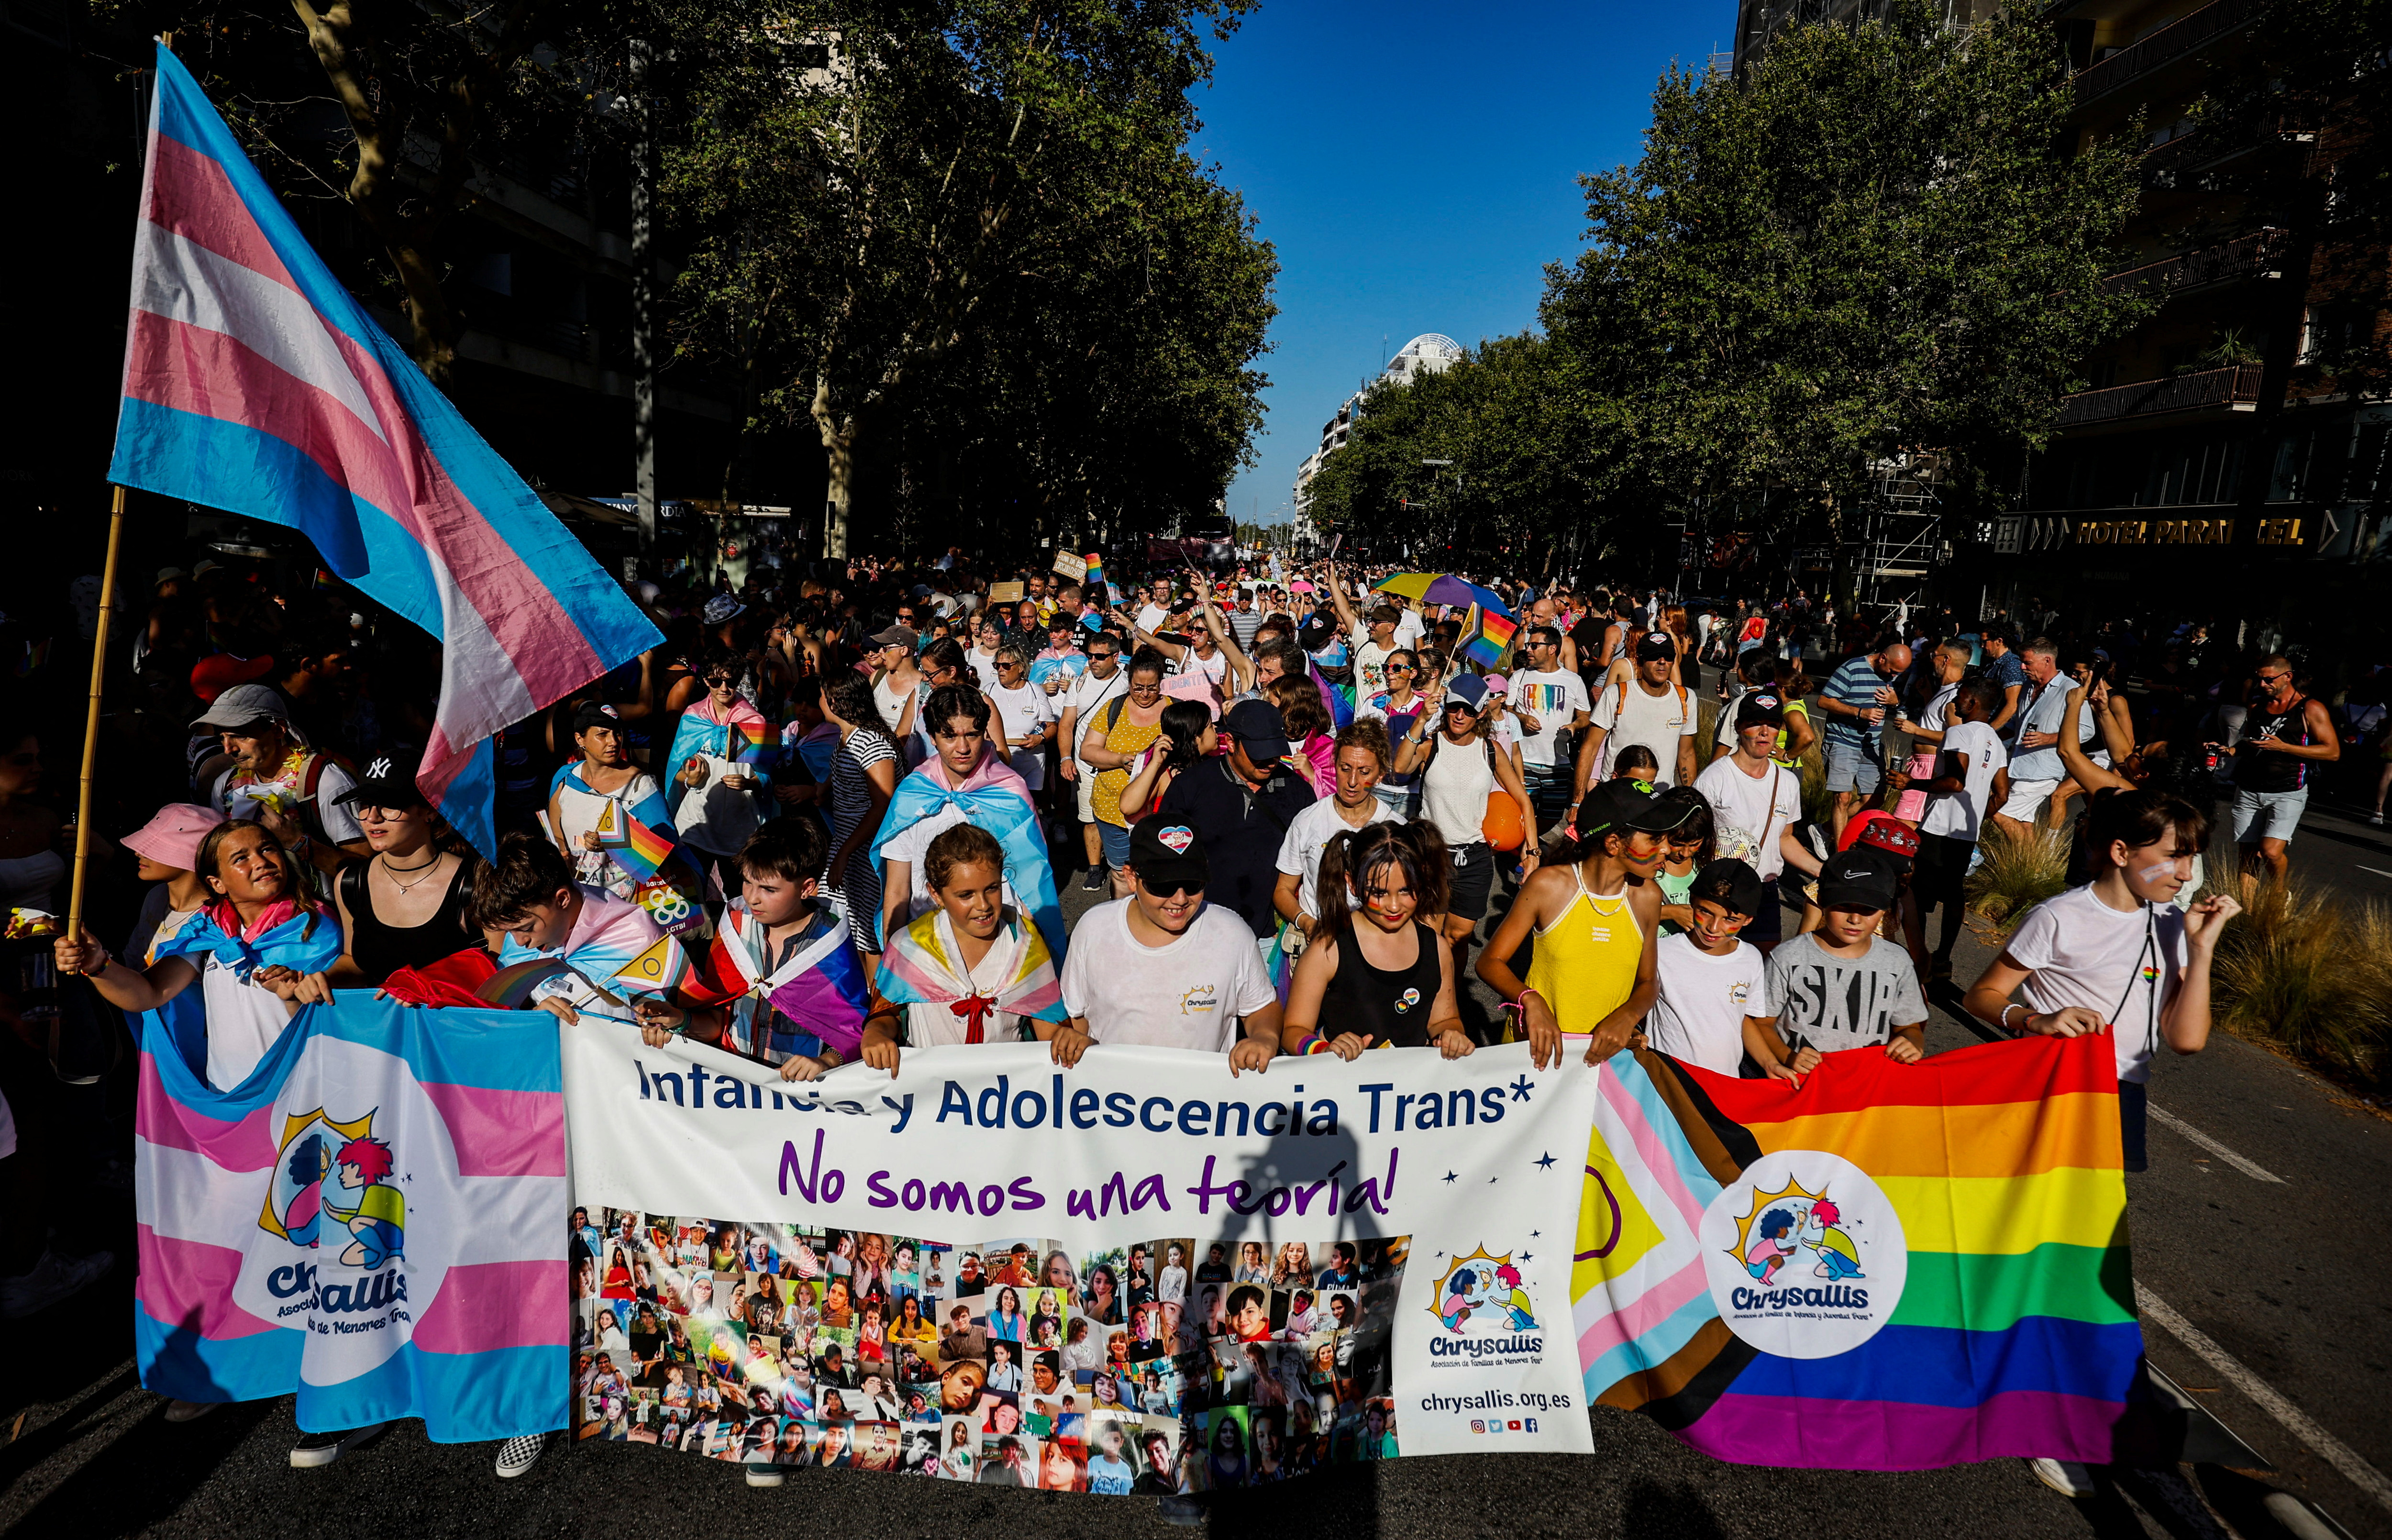 Families of Spanish trans youths fear roll-back of rights Reuters pic